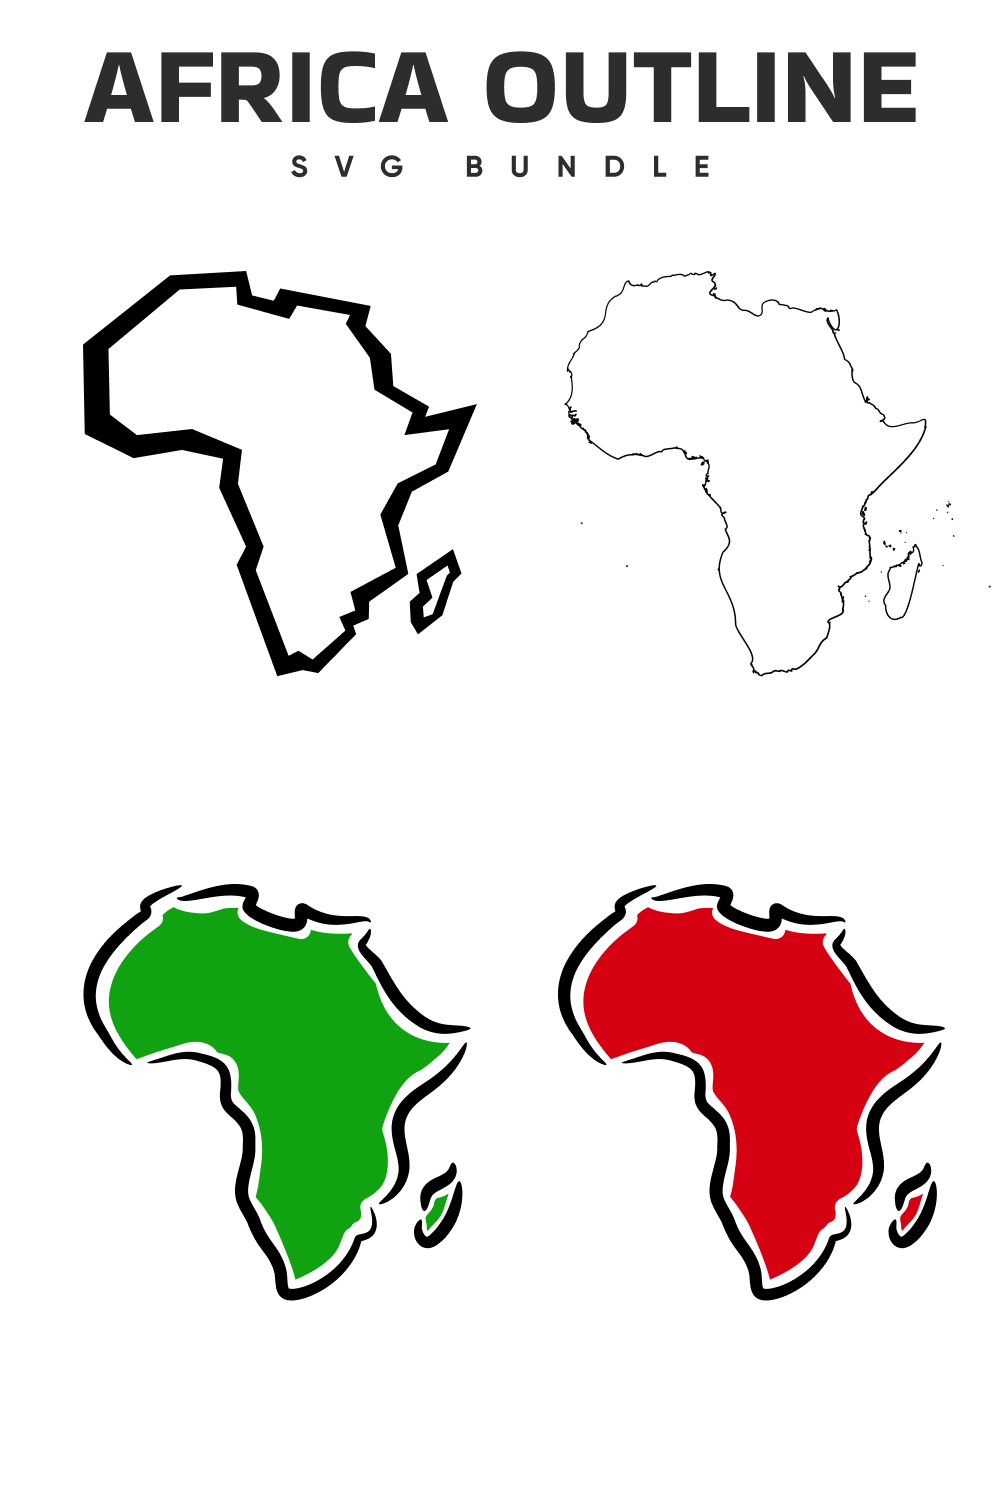 African outline maps with different borders colors.